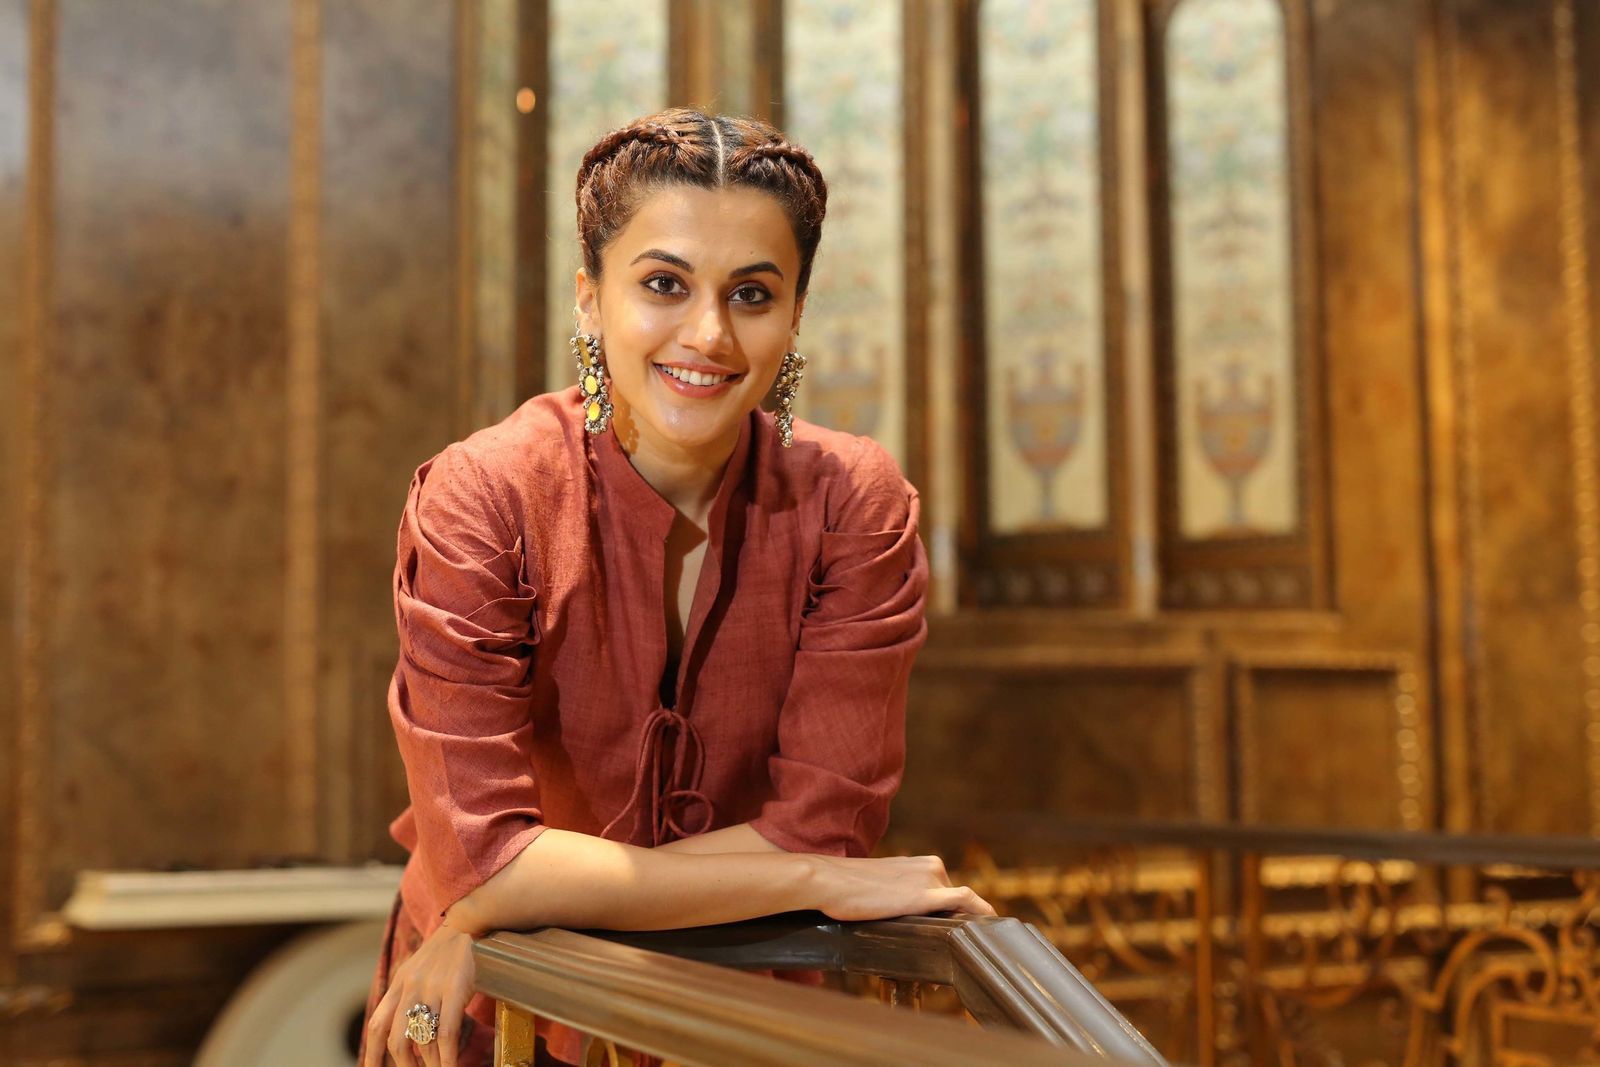 Taapsee Pannu To Resume Shooting For Haseen Dilruba From 15 October, Soon After Her Maldives Vacation